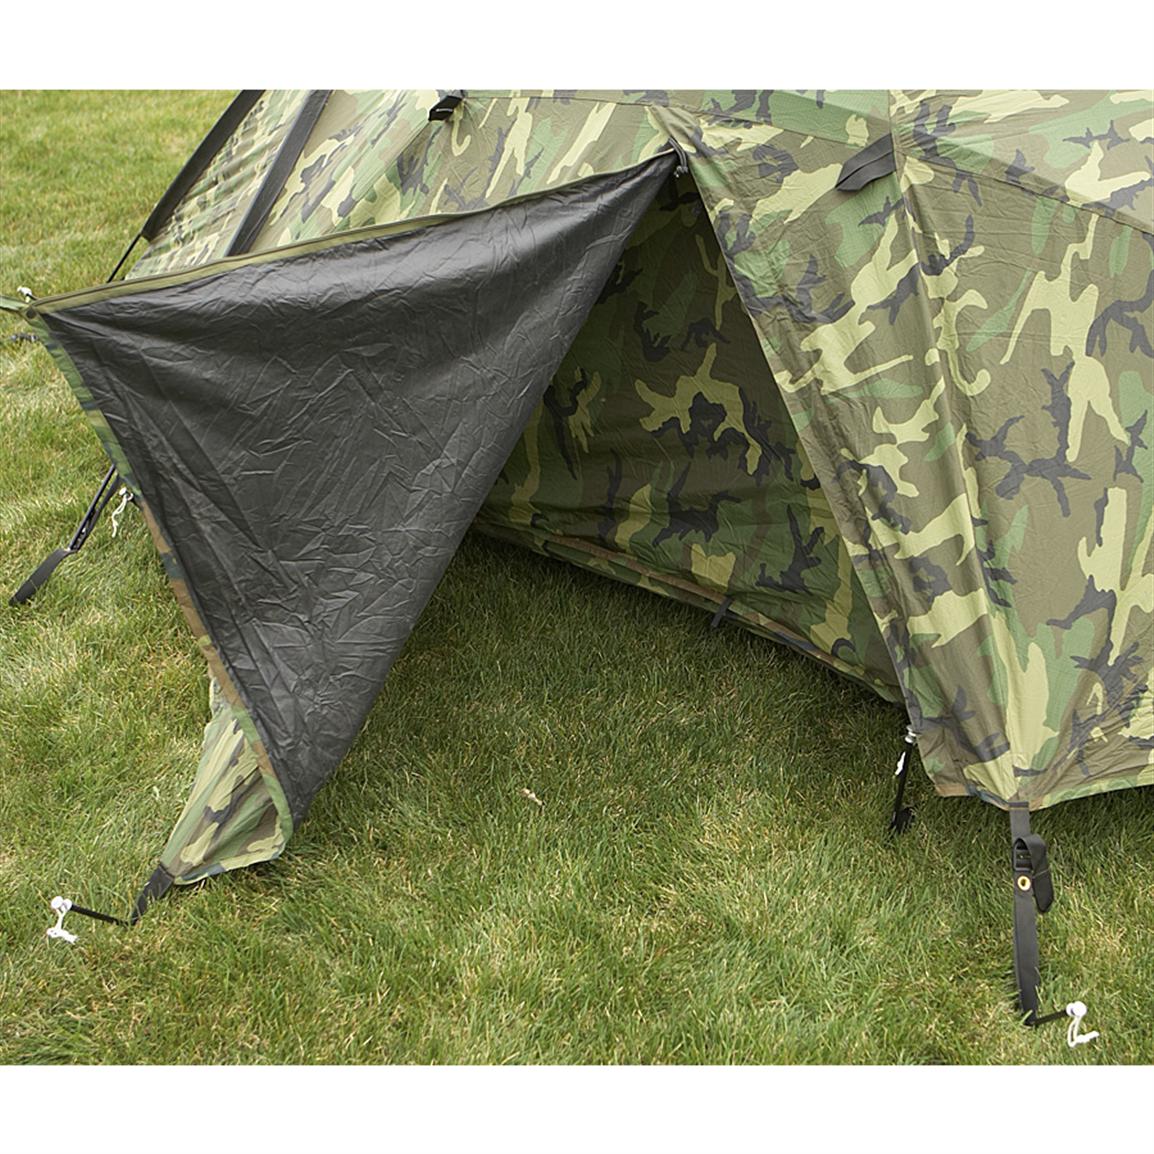 Used U.S. Military ECWS Dome Tent, Woodland Camo - 124320, at Sportsman ...